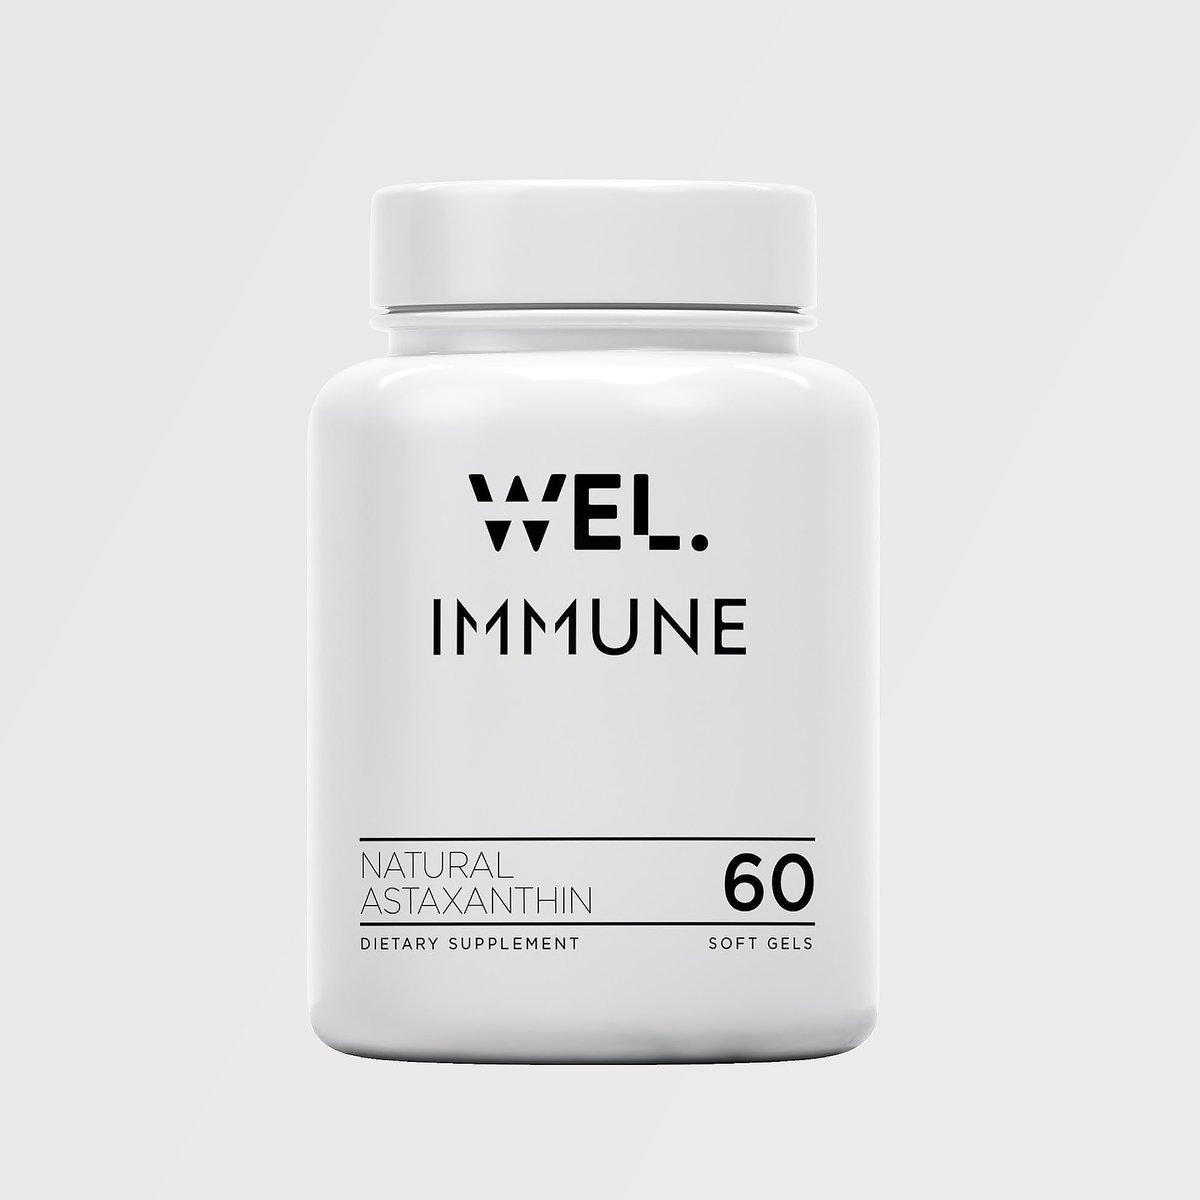 Follow and retweet @thewelcompany for chance to win 30 day supply Immune Booster #holisticnutrition #holisticlifestyle #totalhealth #healthyandhappy 
#loveyourselffirst #moodfood #happinessis #fuelyourbody 
#healthynotskinny #fitchicksrock #dancerforyou #soulfoodsunday